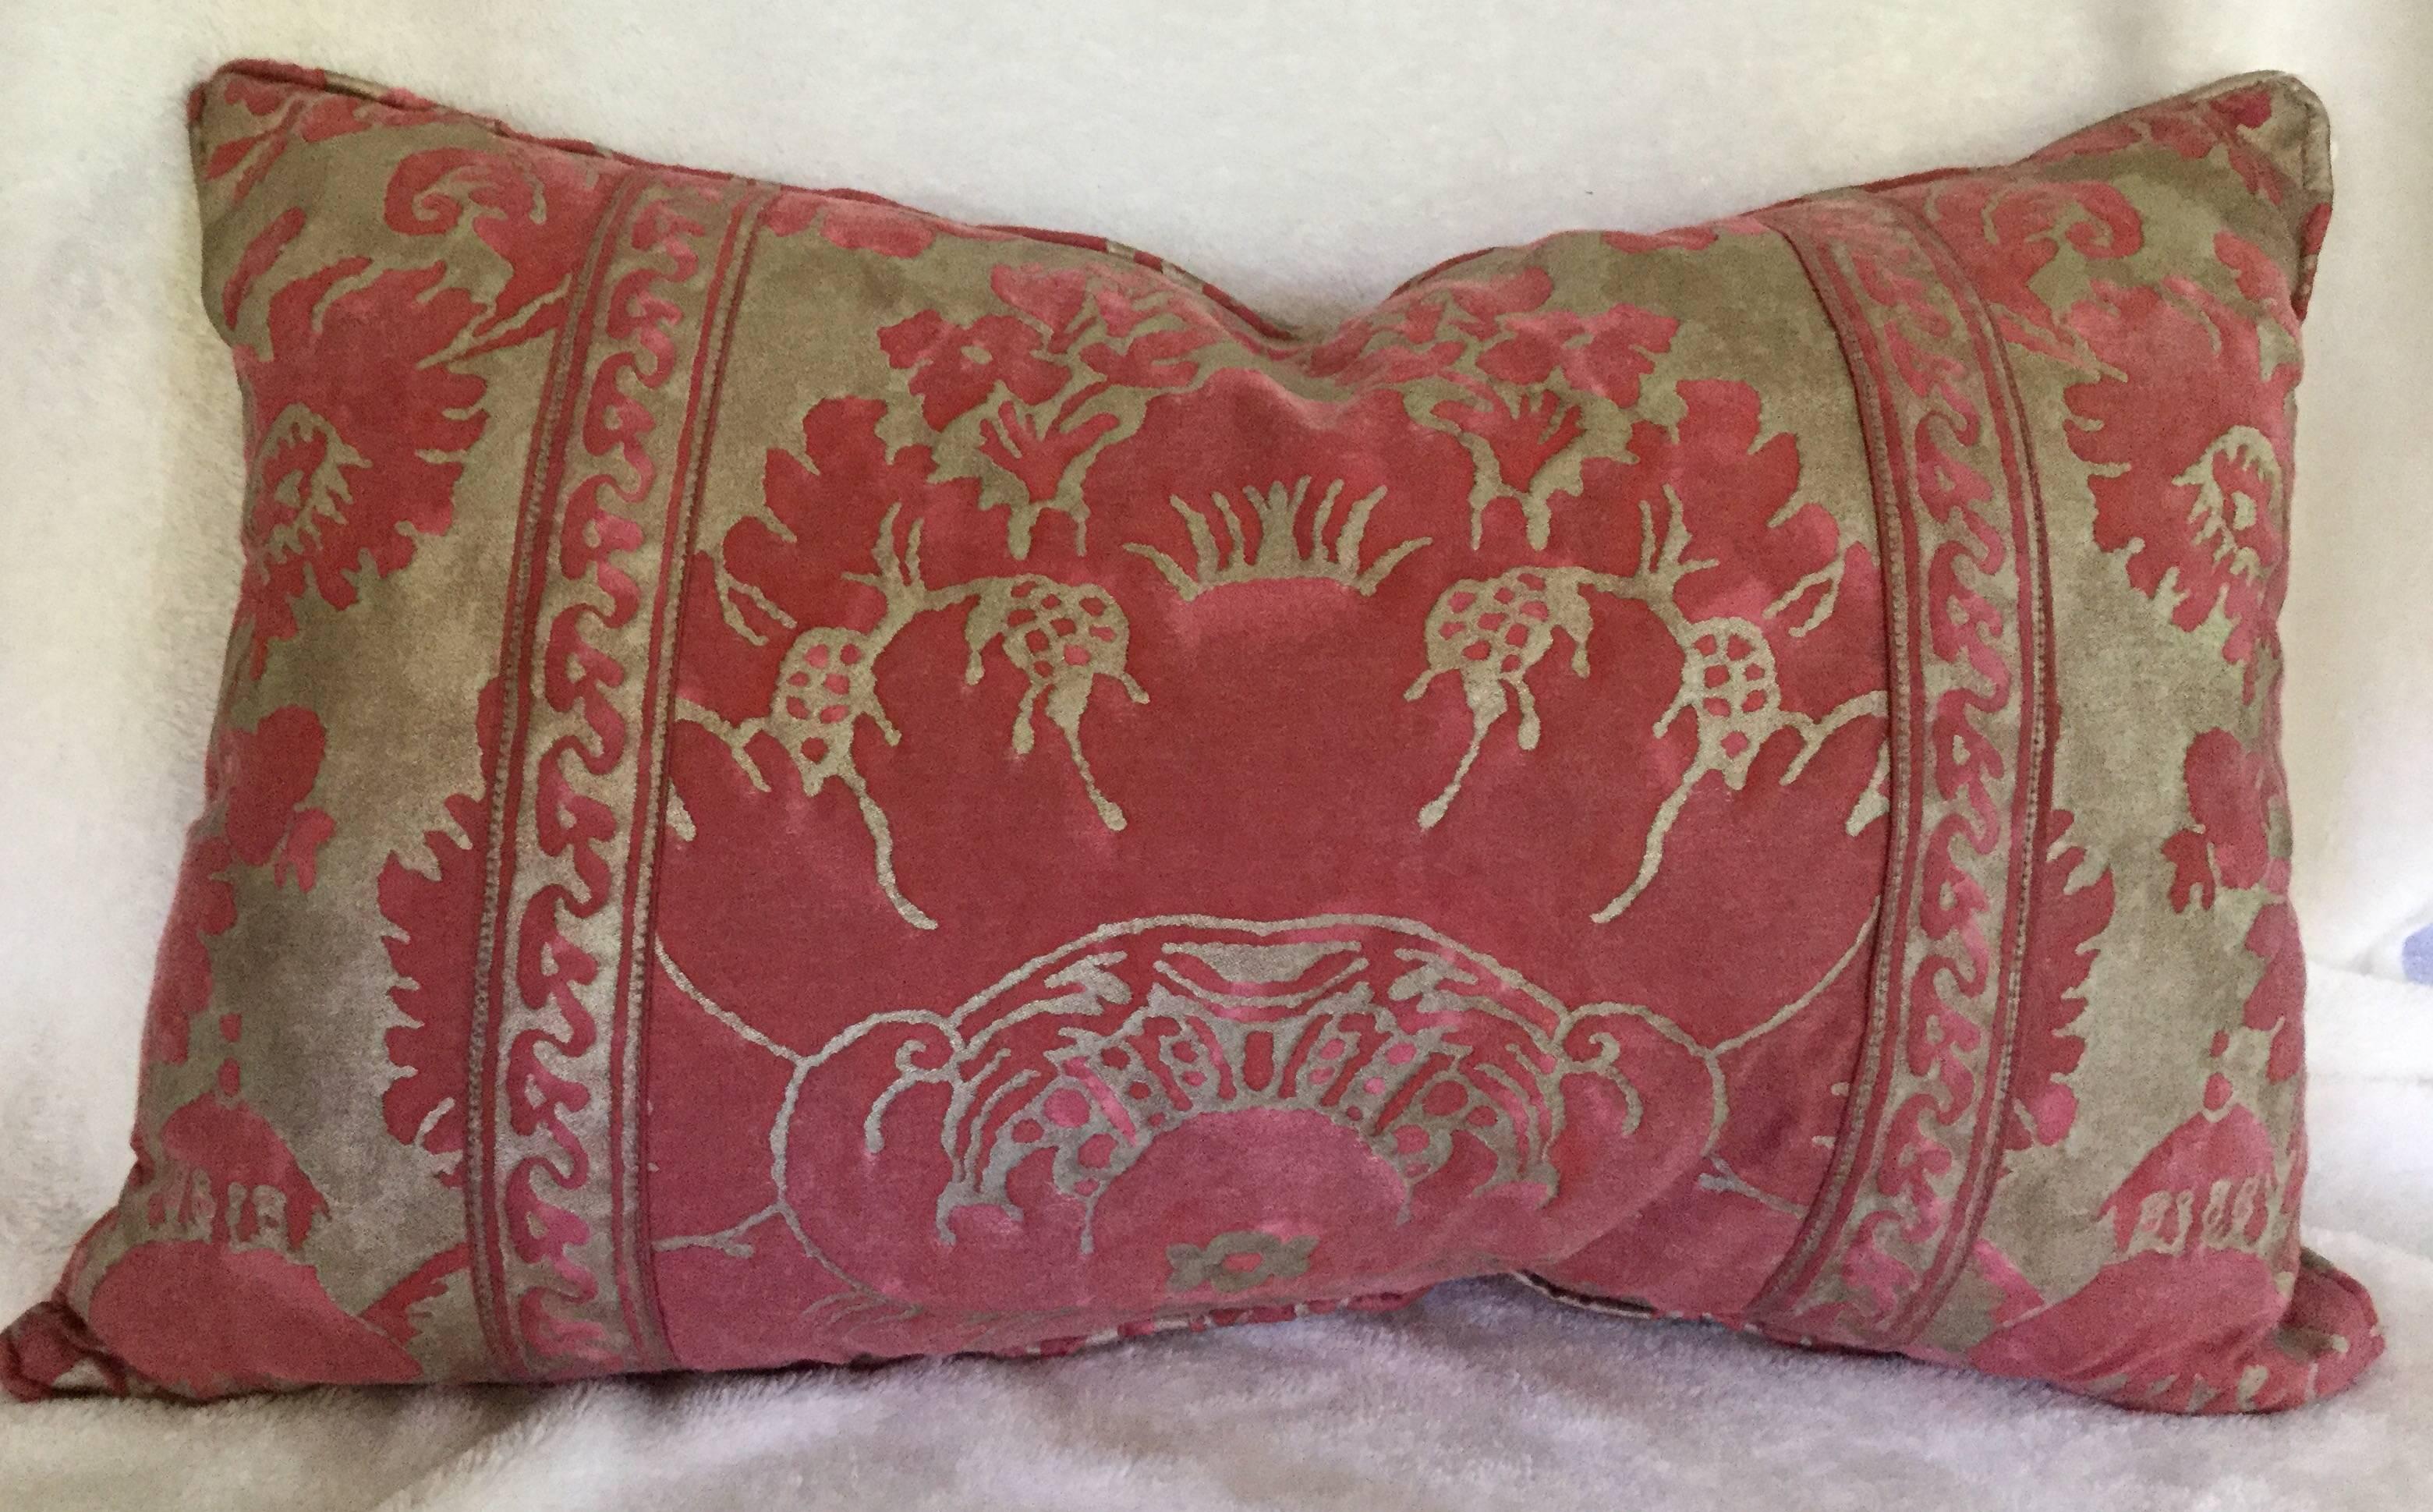 Decorative down-filled red and silver-
gilt Fortuny cushions with Fortuny trim.